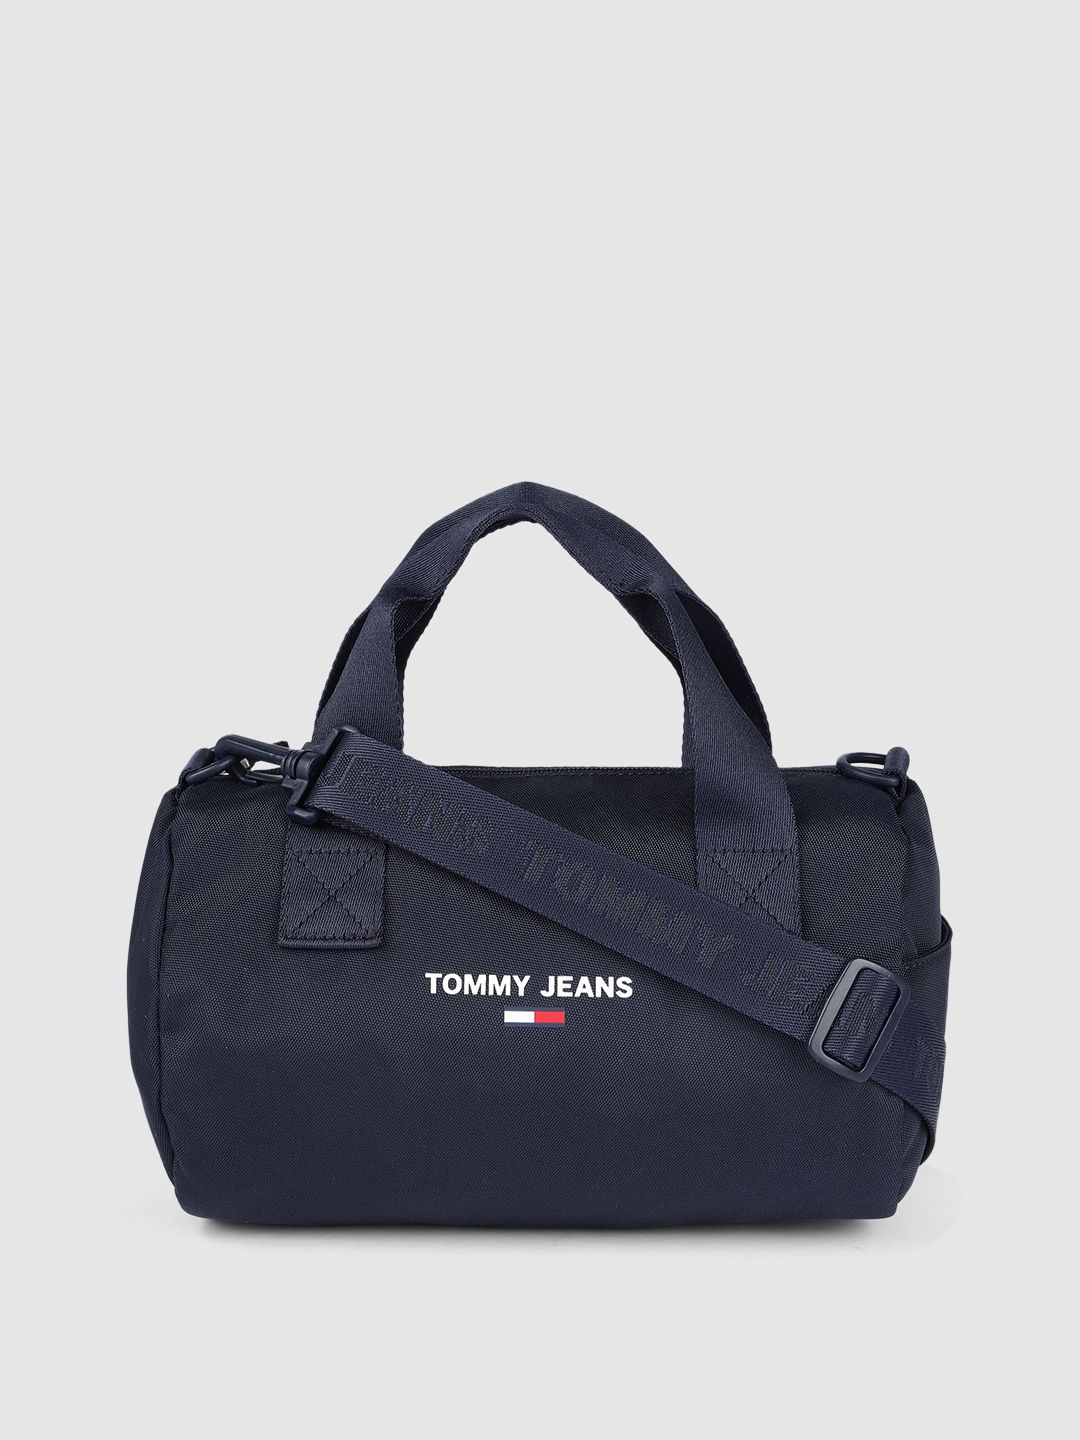 Tommy Hilfiger Navy Blue Structured Handheld Bag Price in India